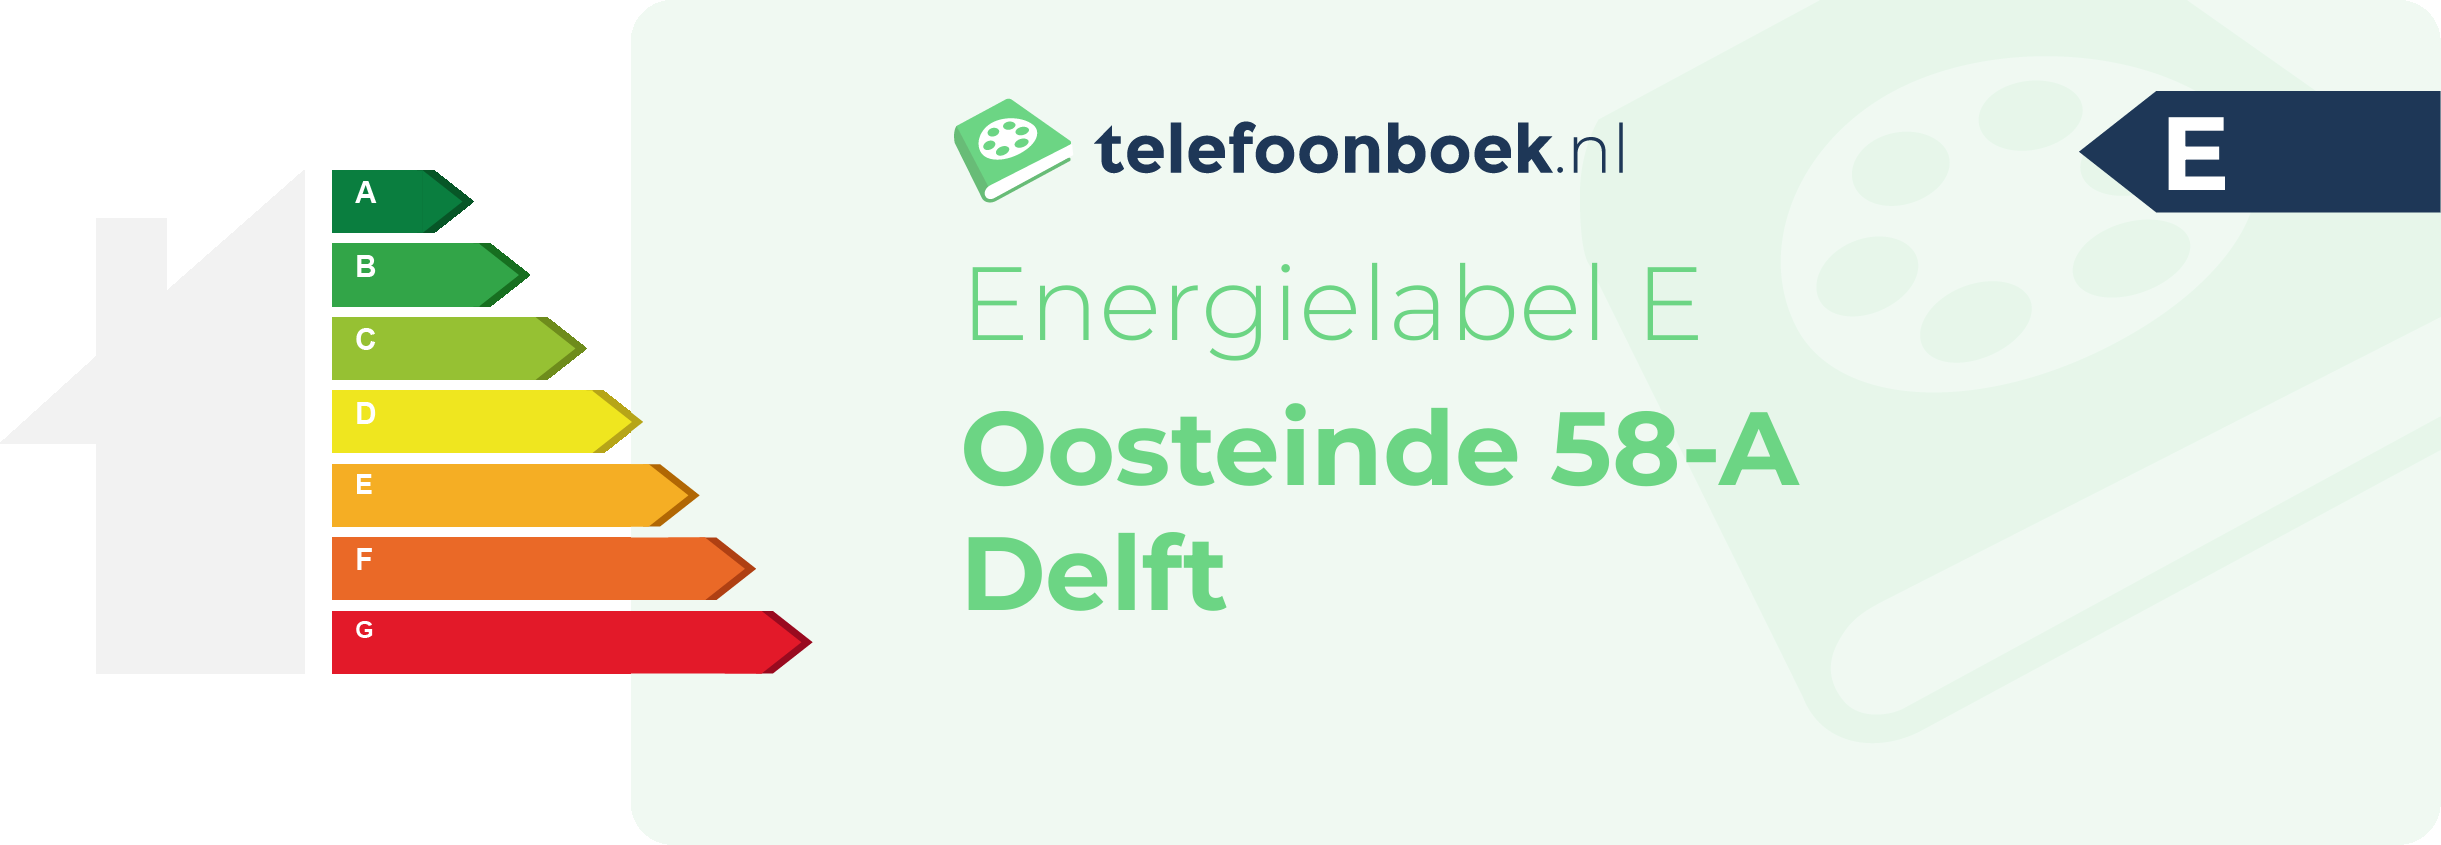 Energielabel Oosteinde 58-A Delft